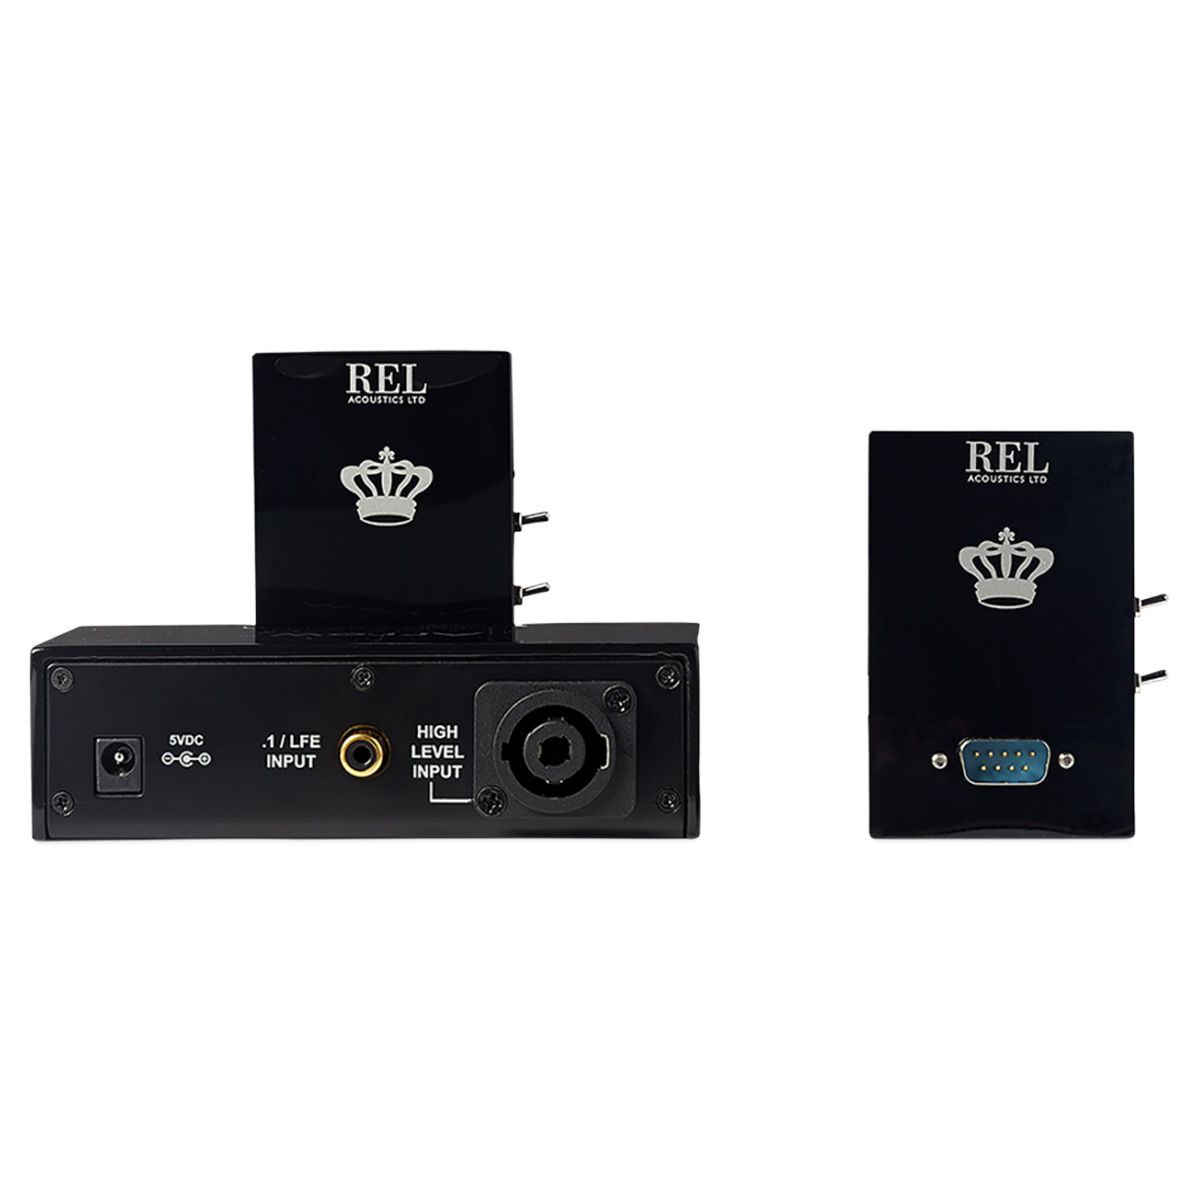 REL Acoustics Arrow Wireless Transmitter / Receiver - rear view of transmitter and receiver